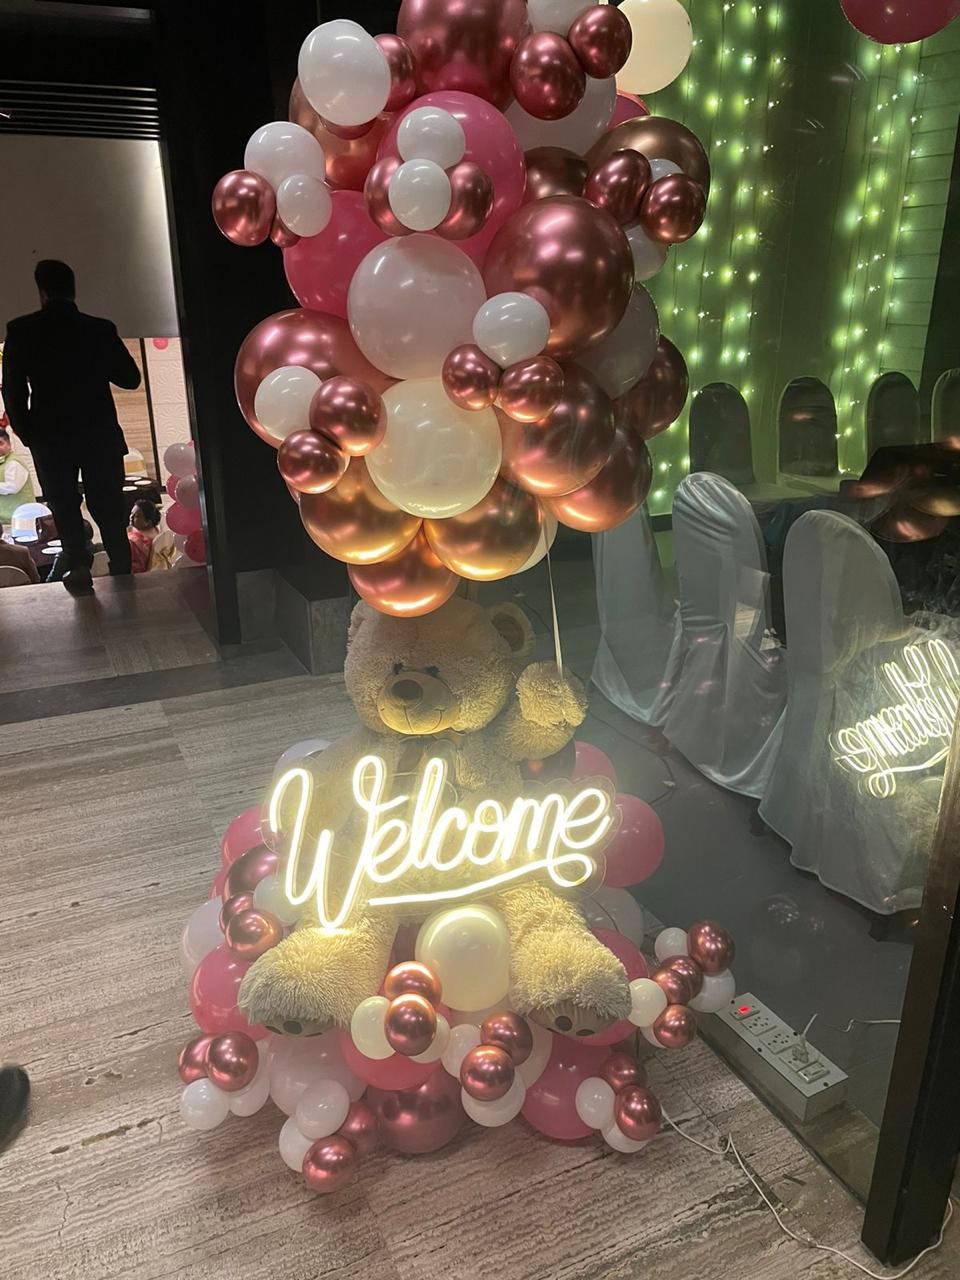 welcome baby decor